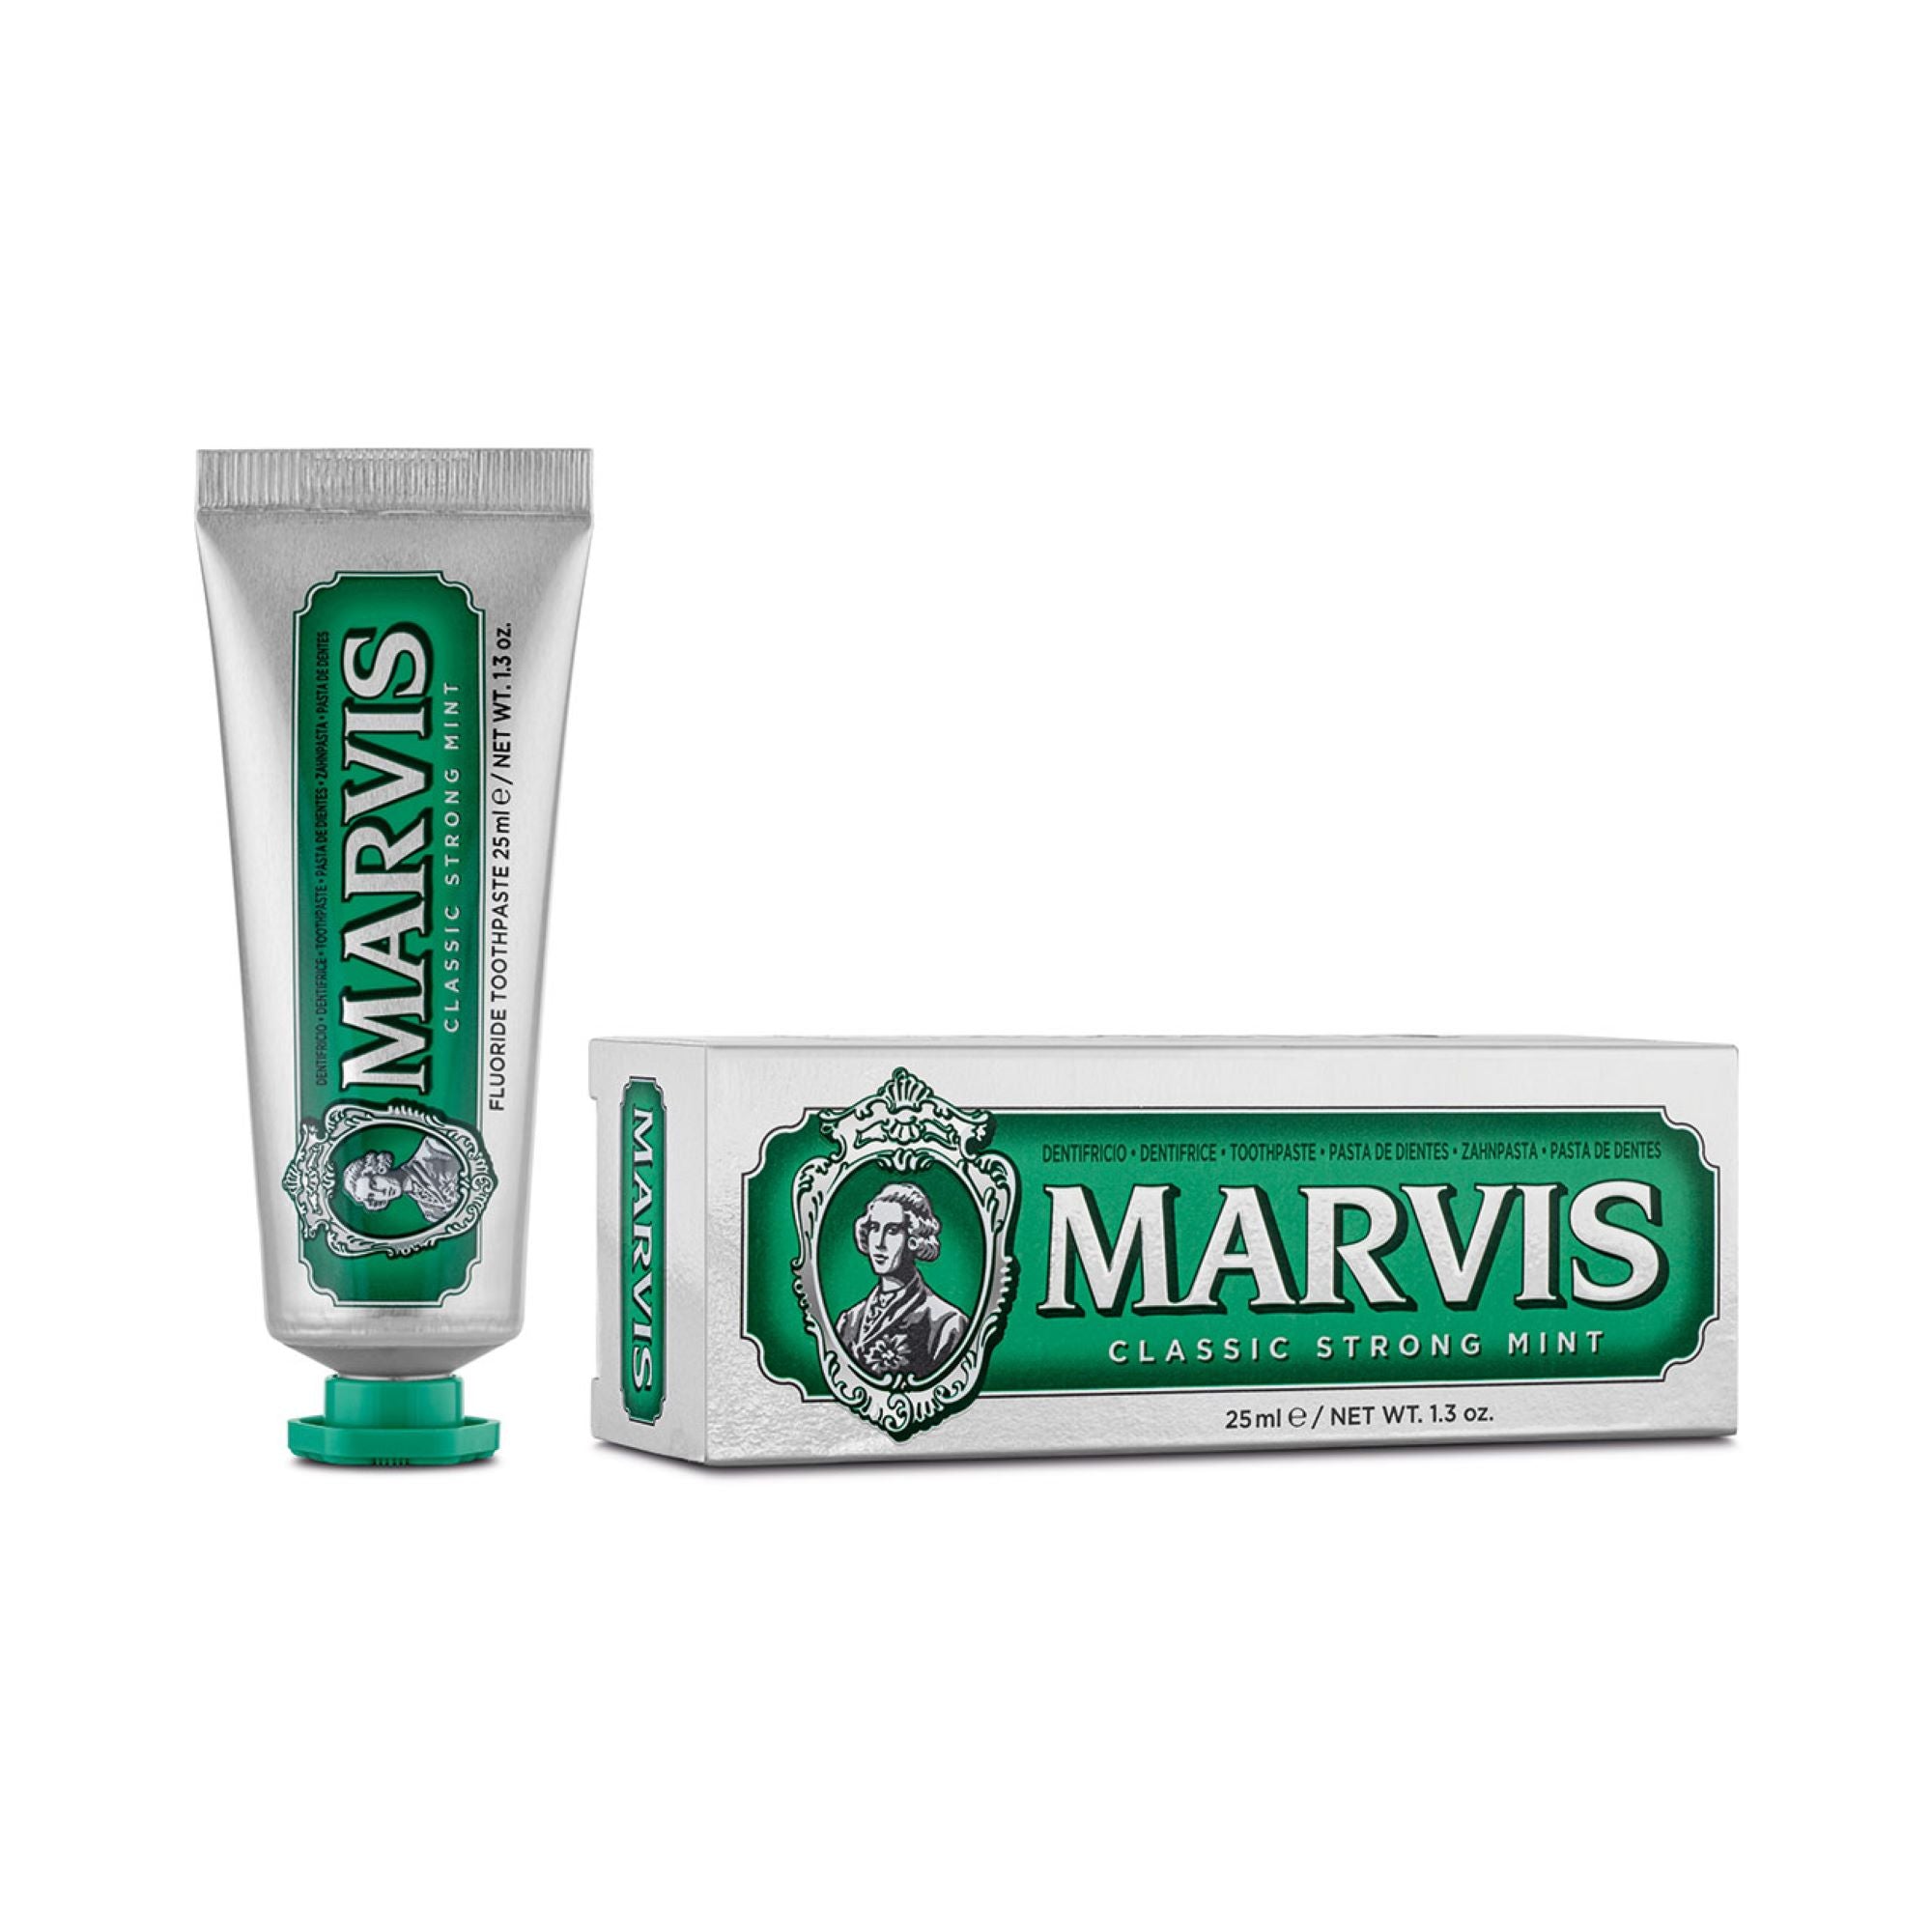 Marvis Classic Strong Mint Mini Toothpaste 25Ml